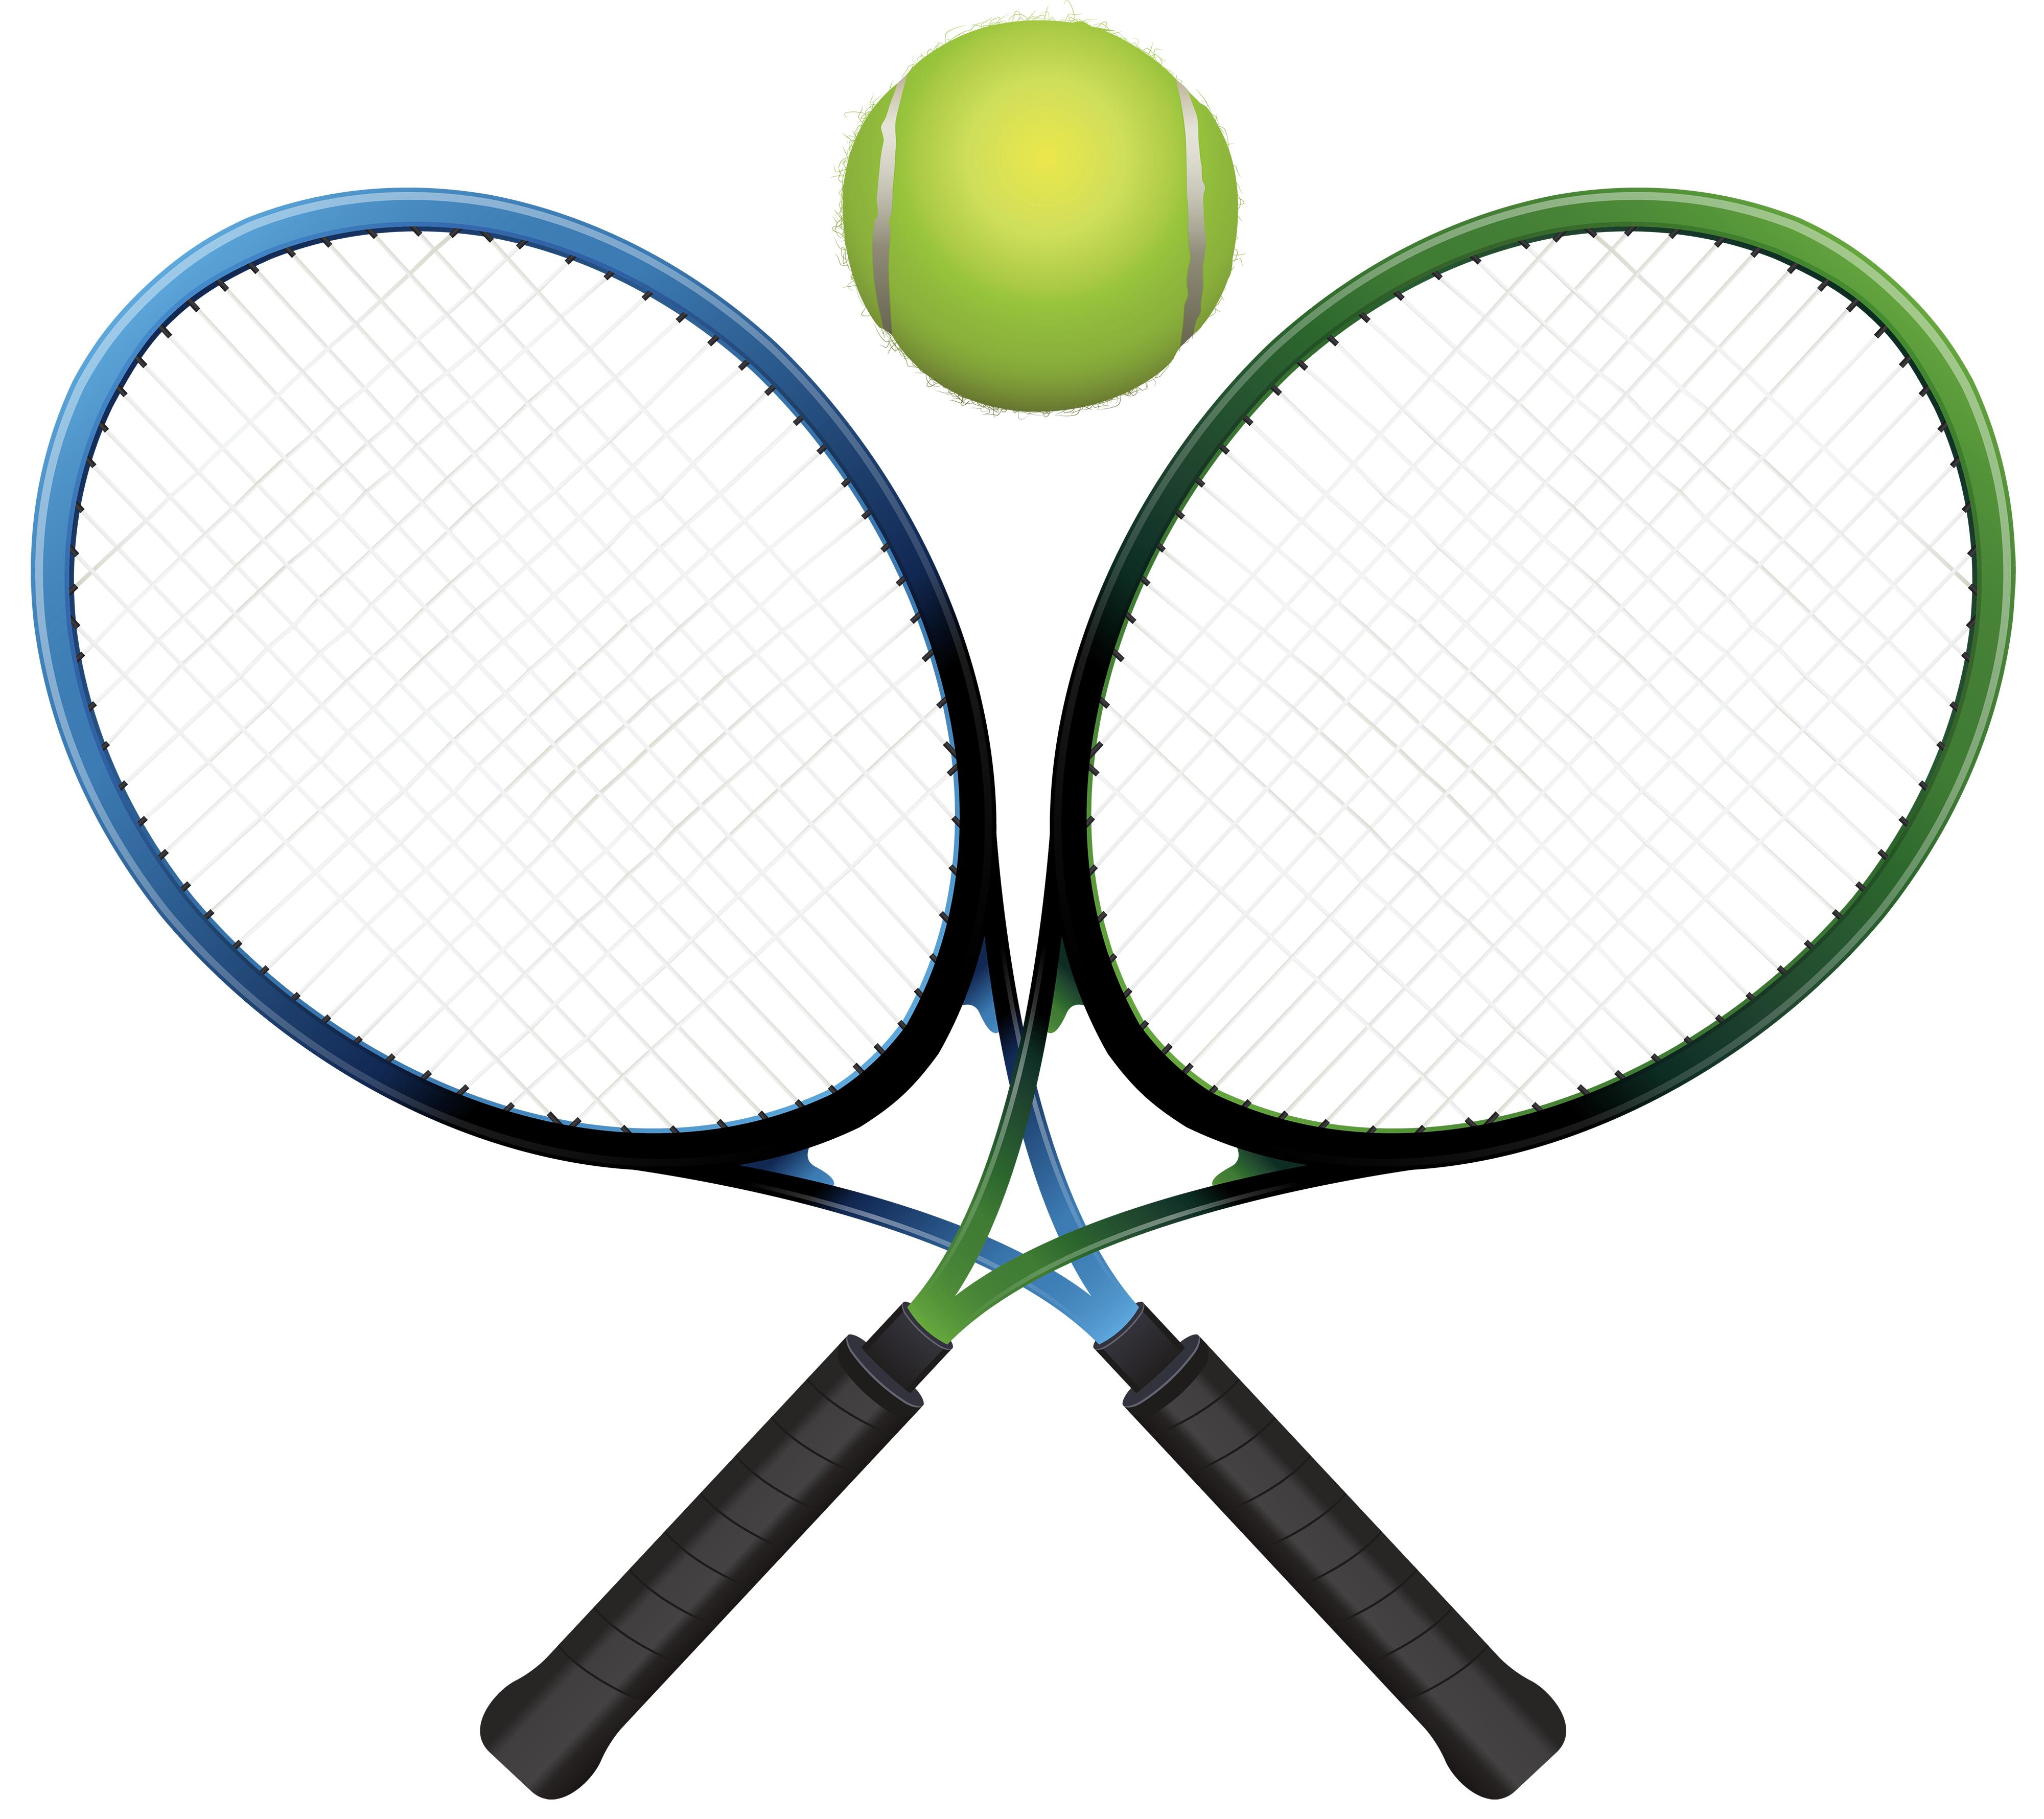 Tennis Rackets And Ball Clipart The Clipart - Cliparts and Others ...